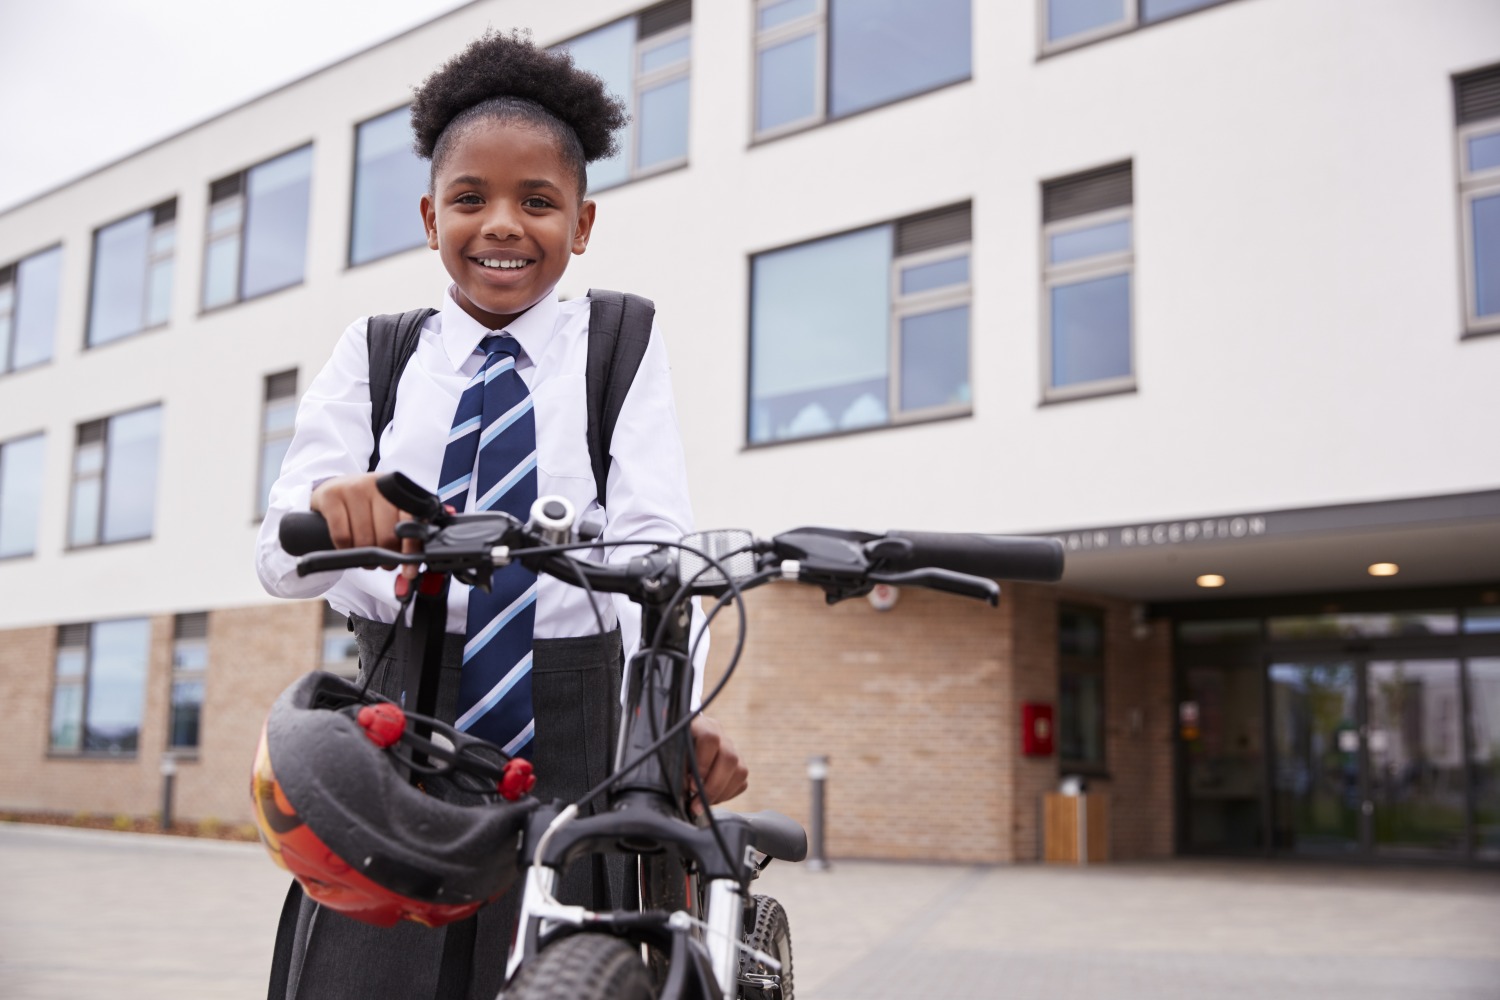 A girl in a school uniform, standing next to her bike, smiling, with a helmet dangling from the handlebar